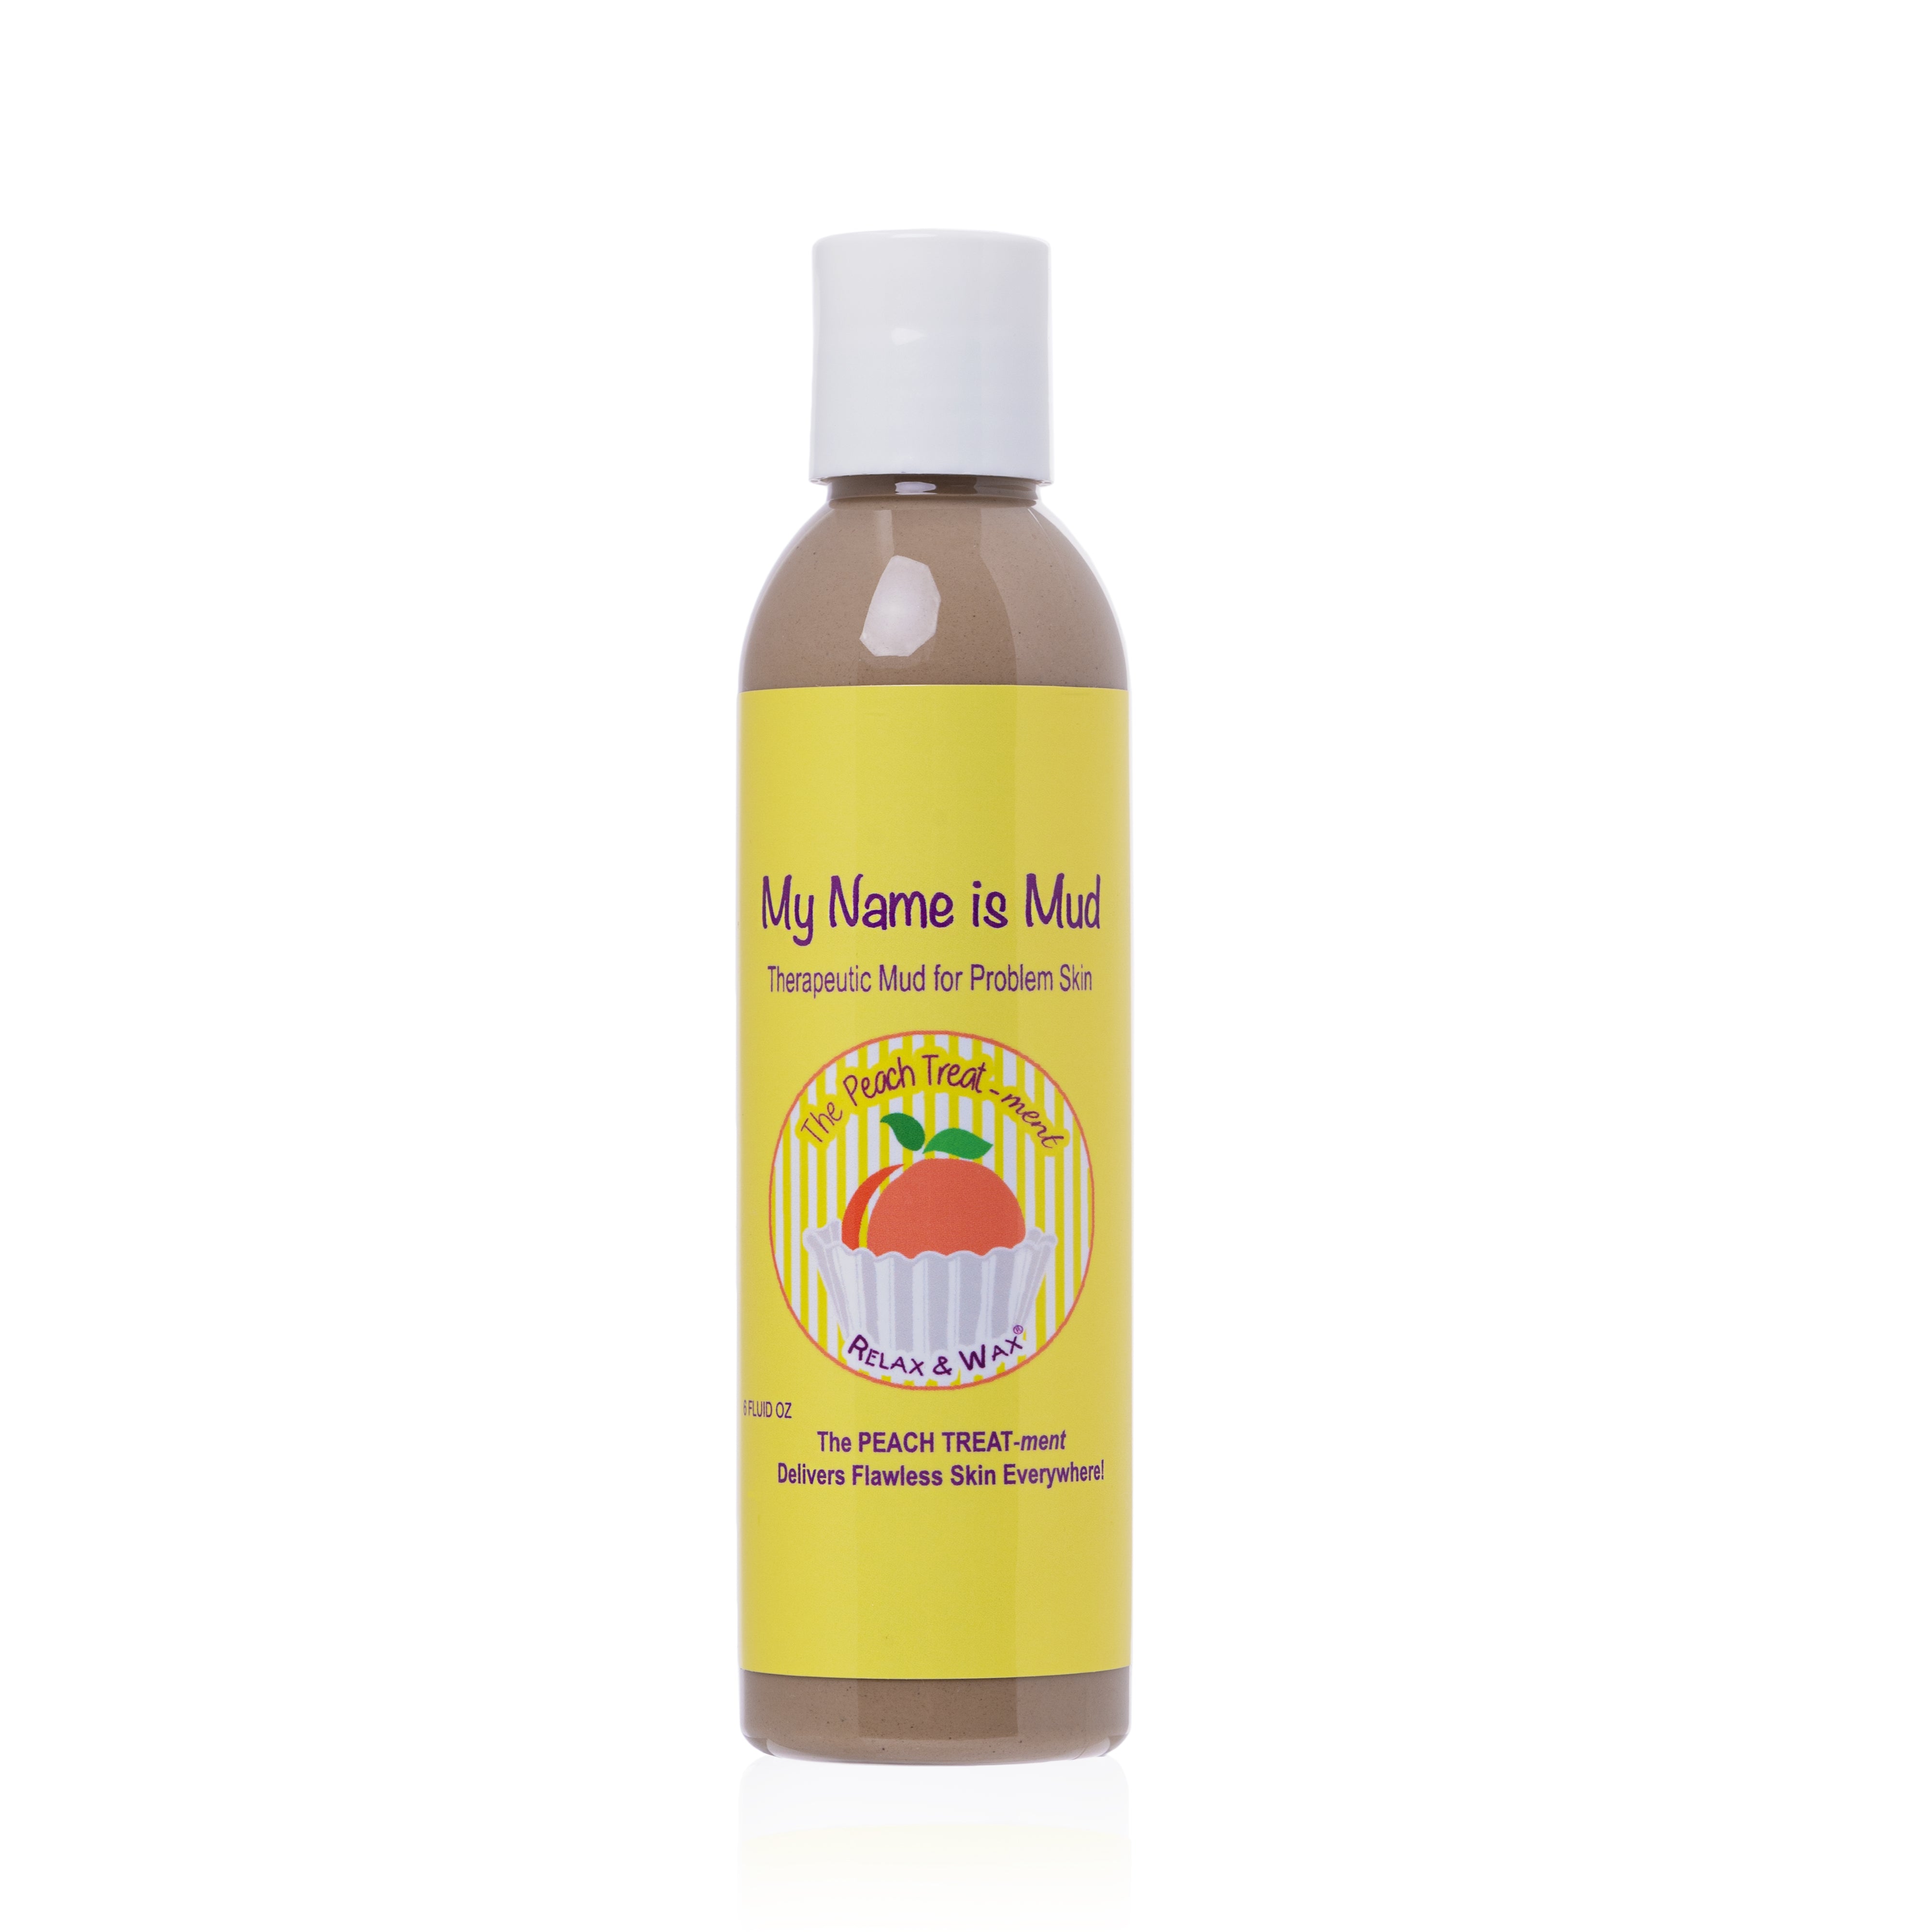 *My Name is Mud 6oz~ therapeutic mud for problem skin Wholesale